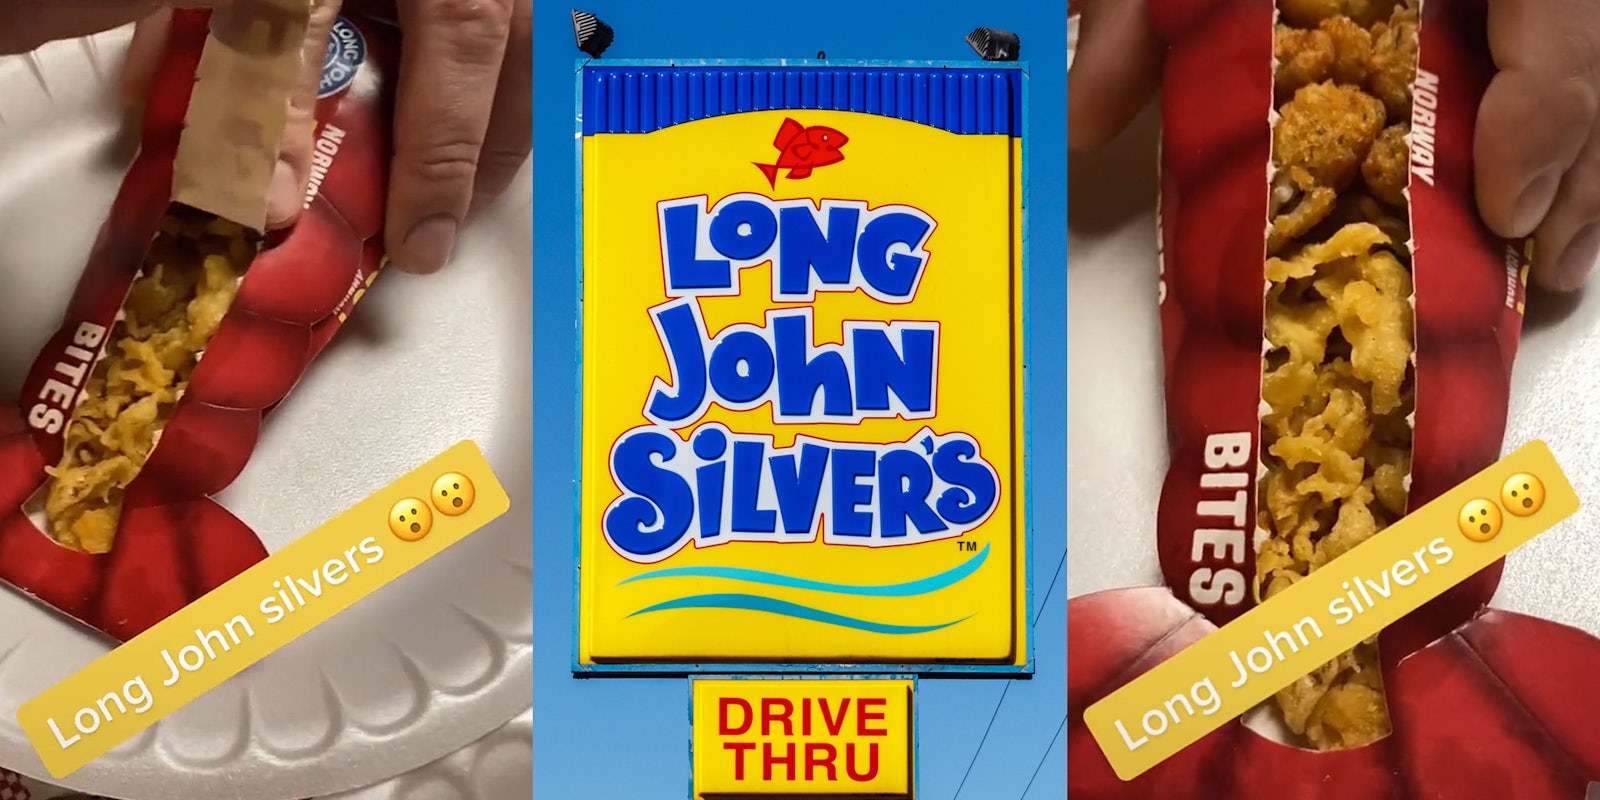 person peeling back cardboard tab on Long John Silver's Lobster Bites container caption 'Long John silvers' (l) Long John Silver's sign with blue sky (c) Long John Silver's Lobster Bites container caption 'Long John silvers' (r)